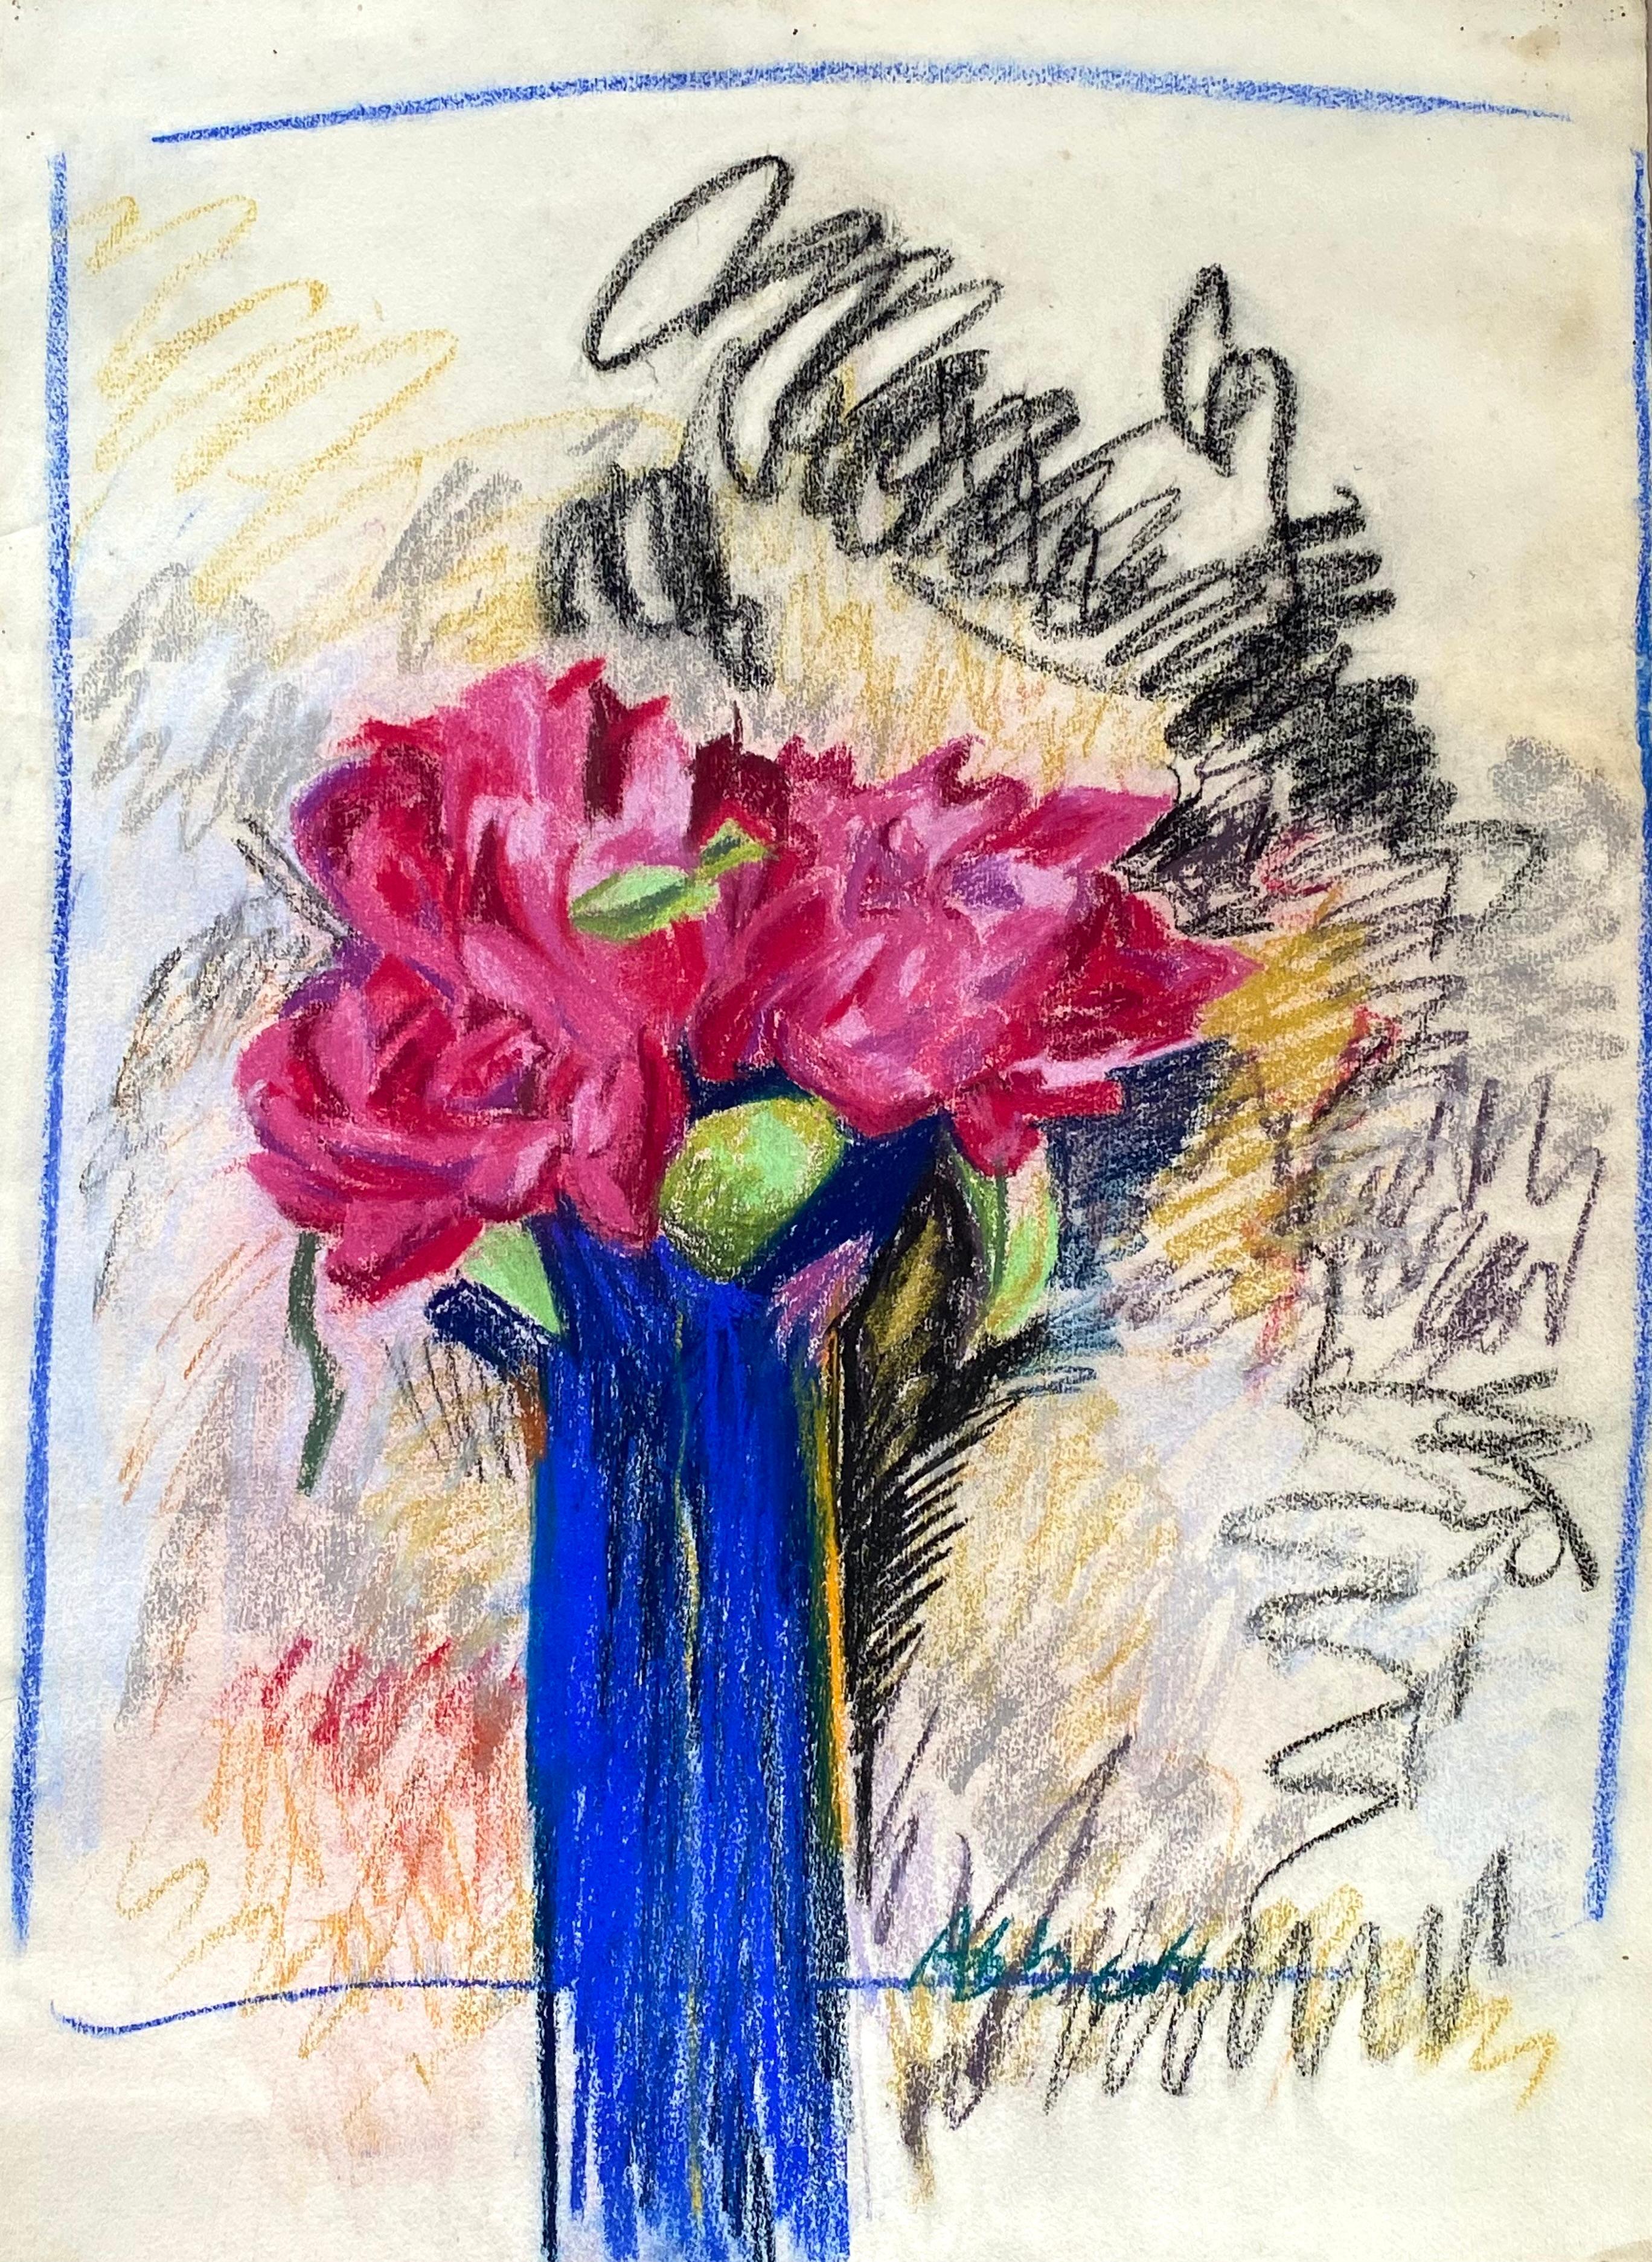 Original oil pastel on archival paper by the renowned New York artist, Mary Abbott.  Signed lower right. Untitled. Circa 1970. Condition is very good. Presently unframed. Sheet size 30 by 22 inches. Rich red flowers in a vibrant blue vase.